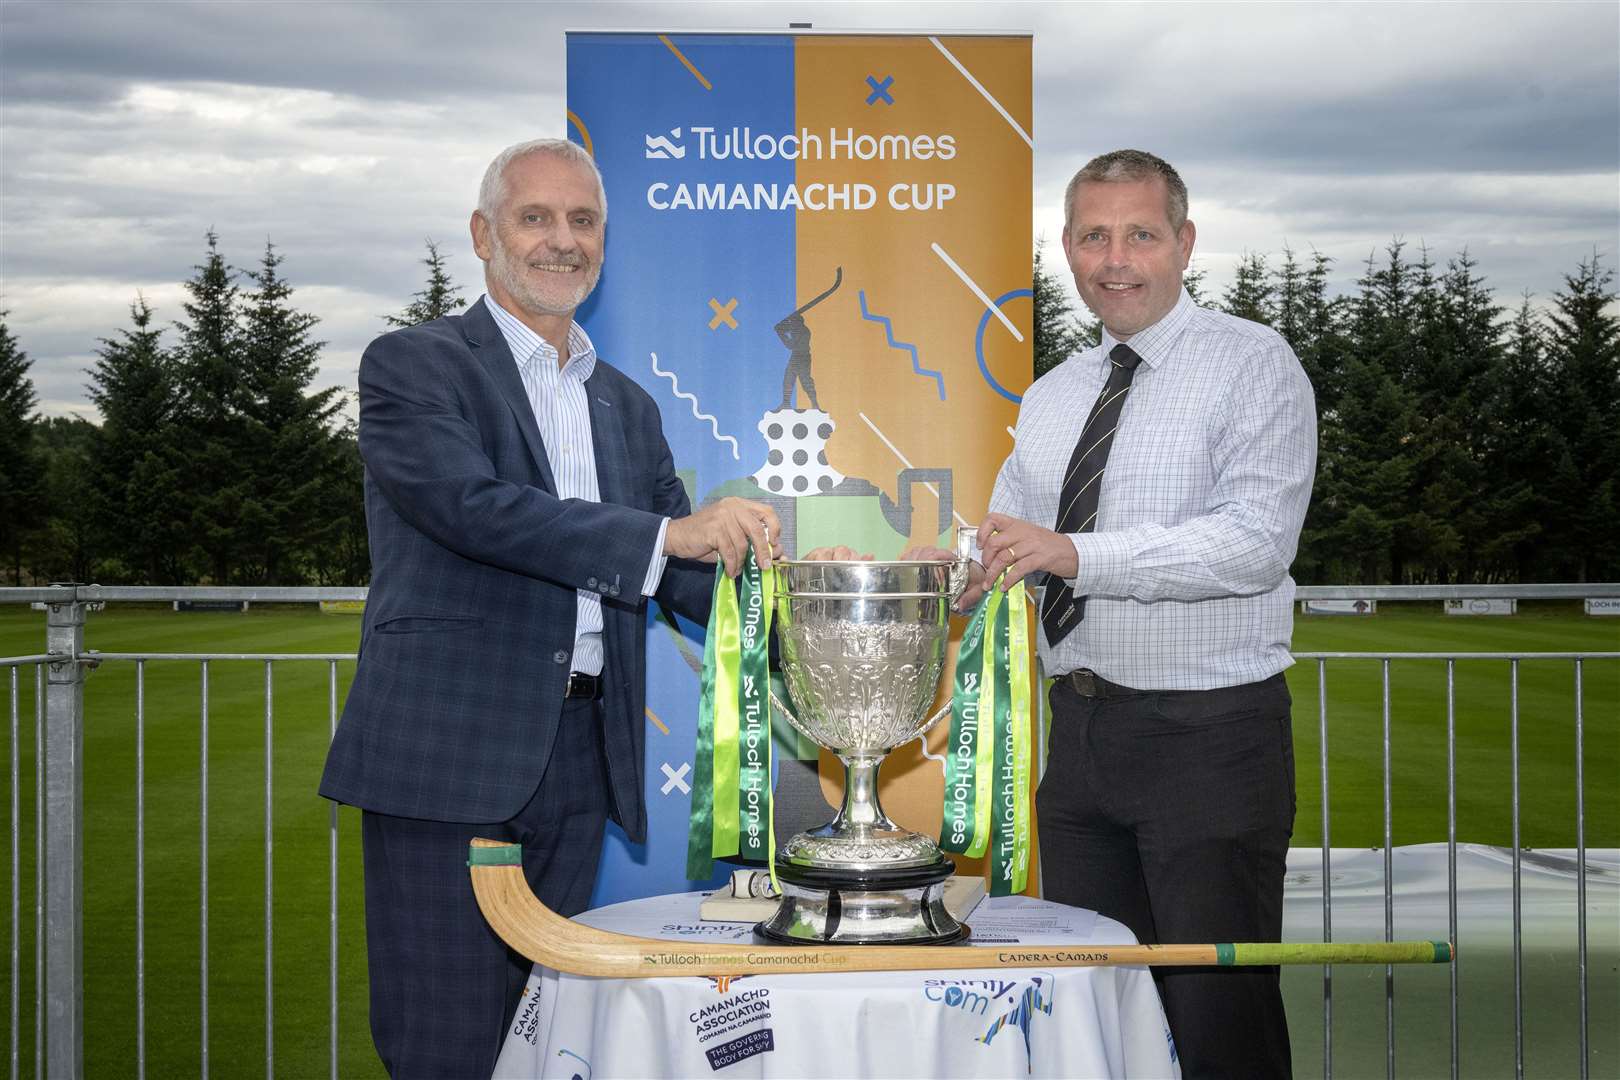 Sandy Grant, Tulloch Homes and Steven MacKenzie at Tulloch Homes Camanachd Cup SF Draw. Photo: Neil G Paterson